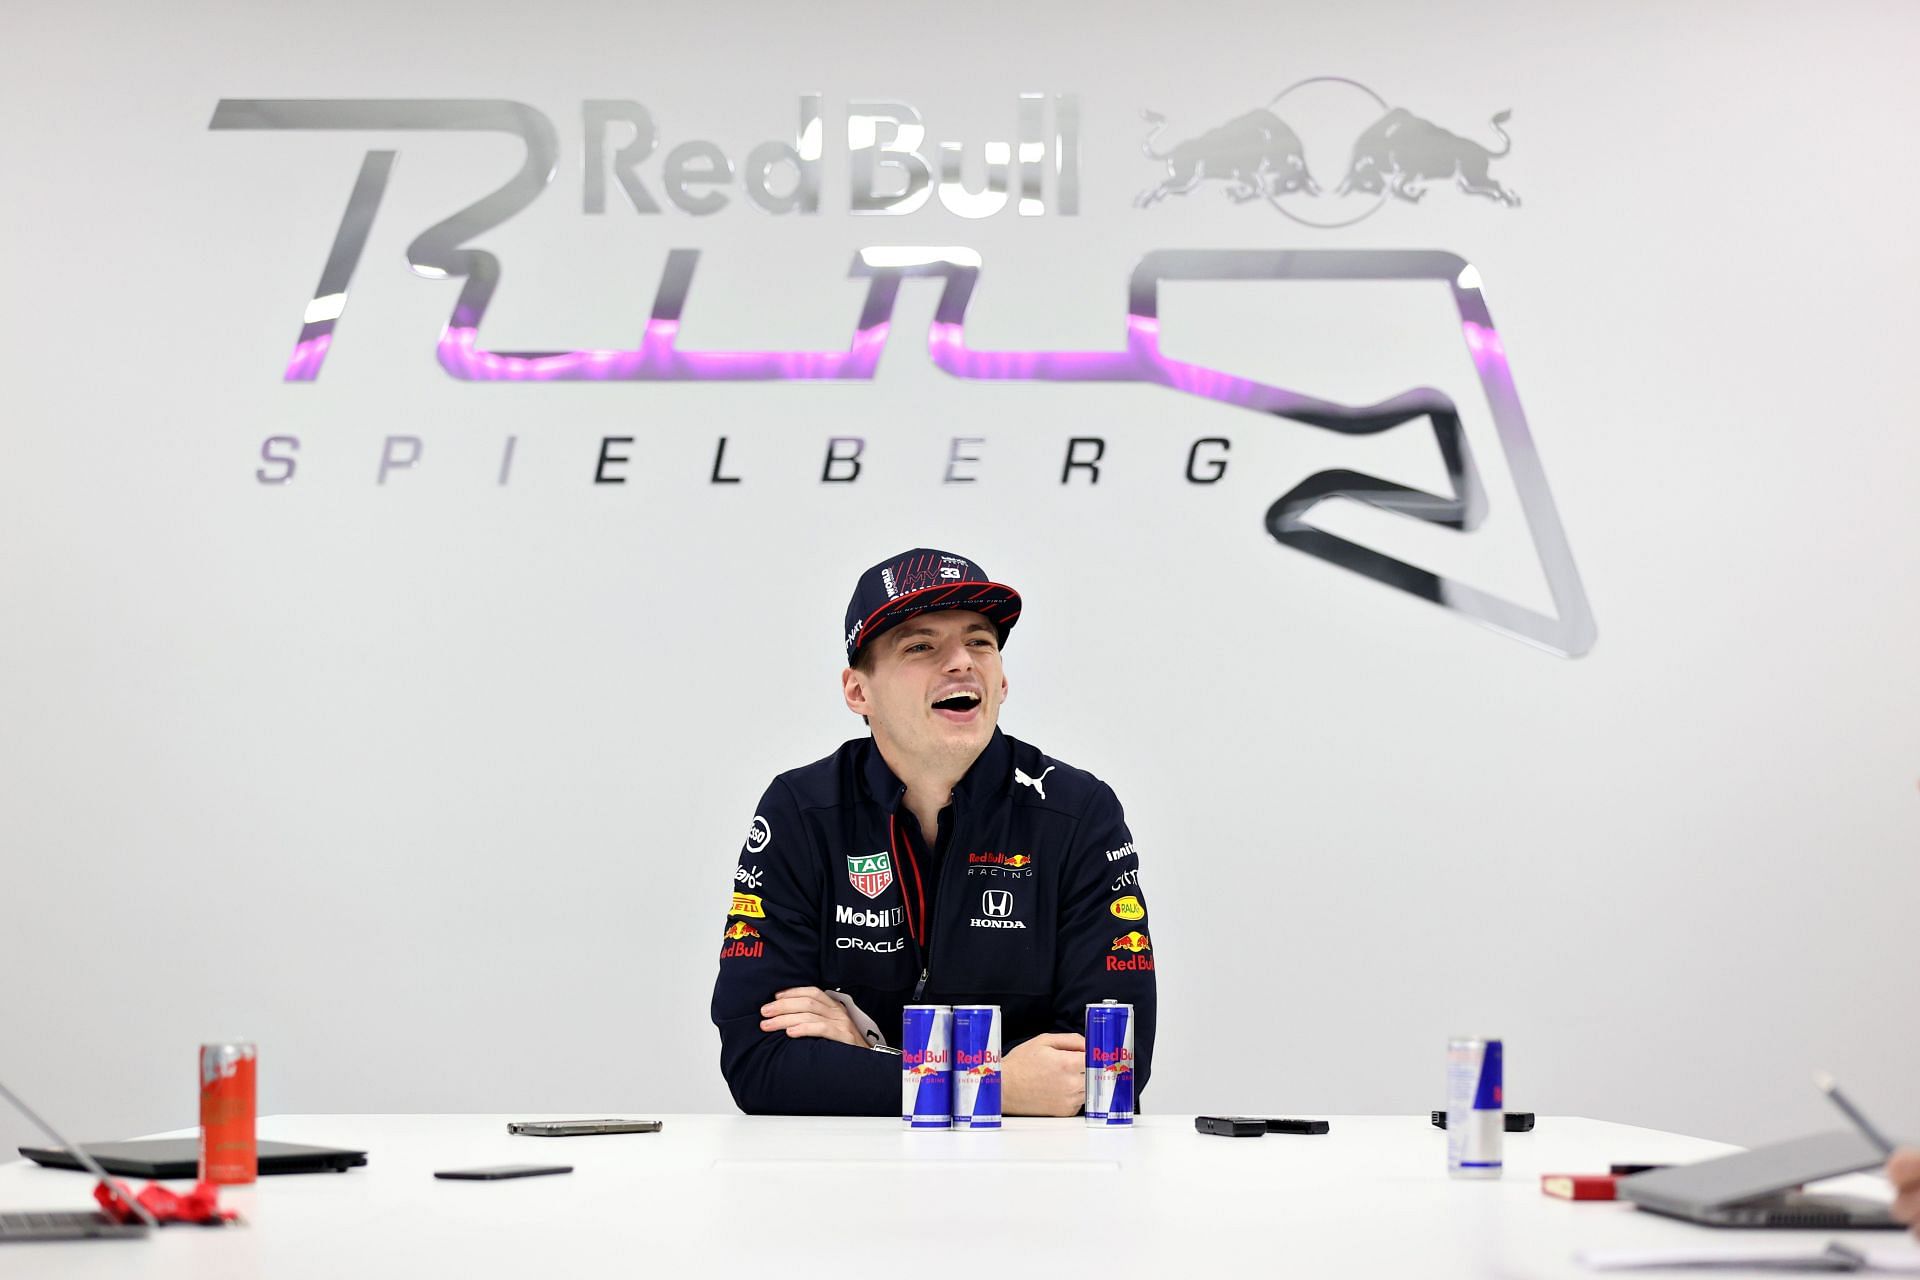 It would be tough for Max Verstappen to defend his title next season